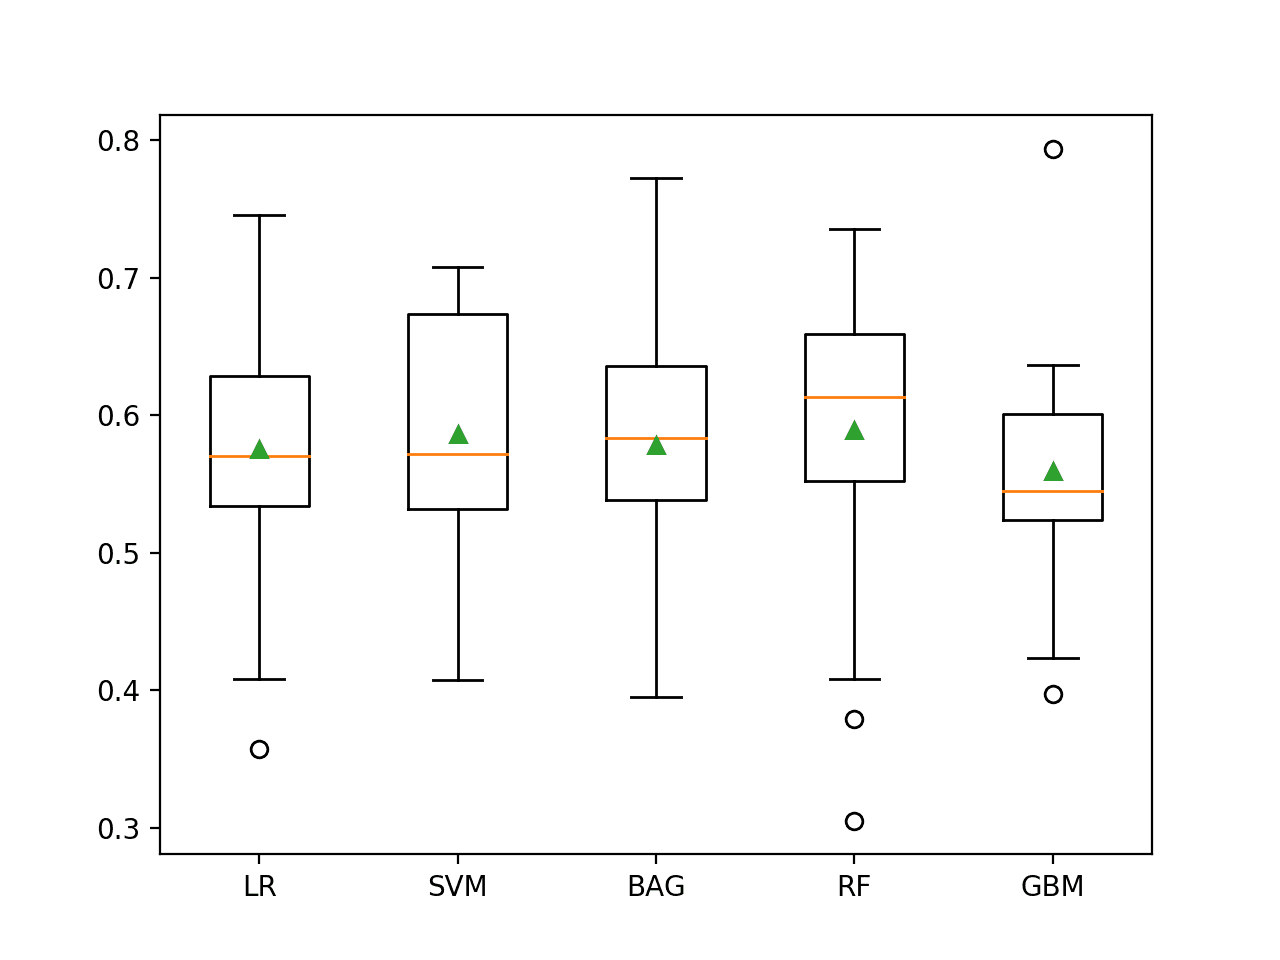 Box and Whisker Plot of Machine Learning Models on the Imbalanced German Credit Dataset